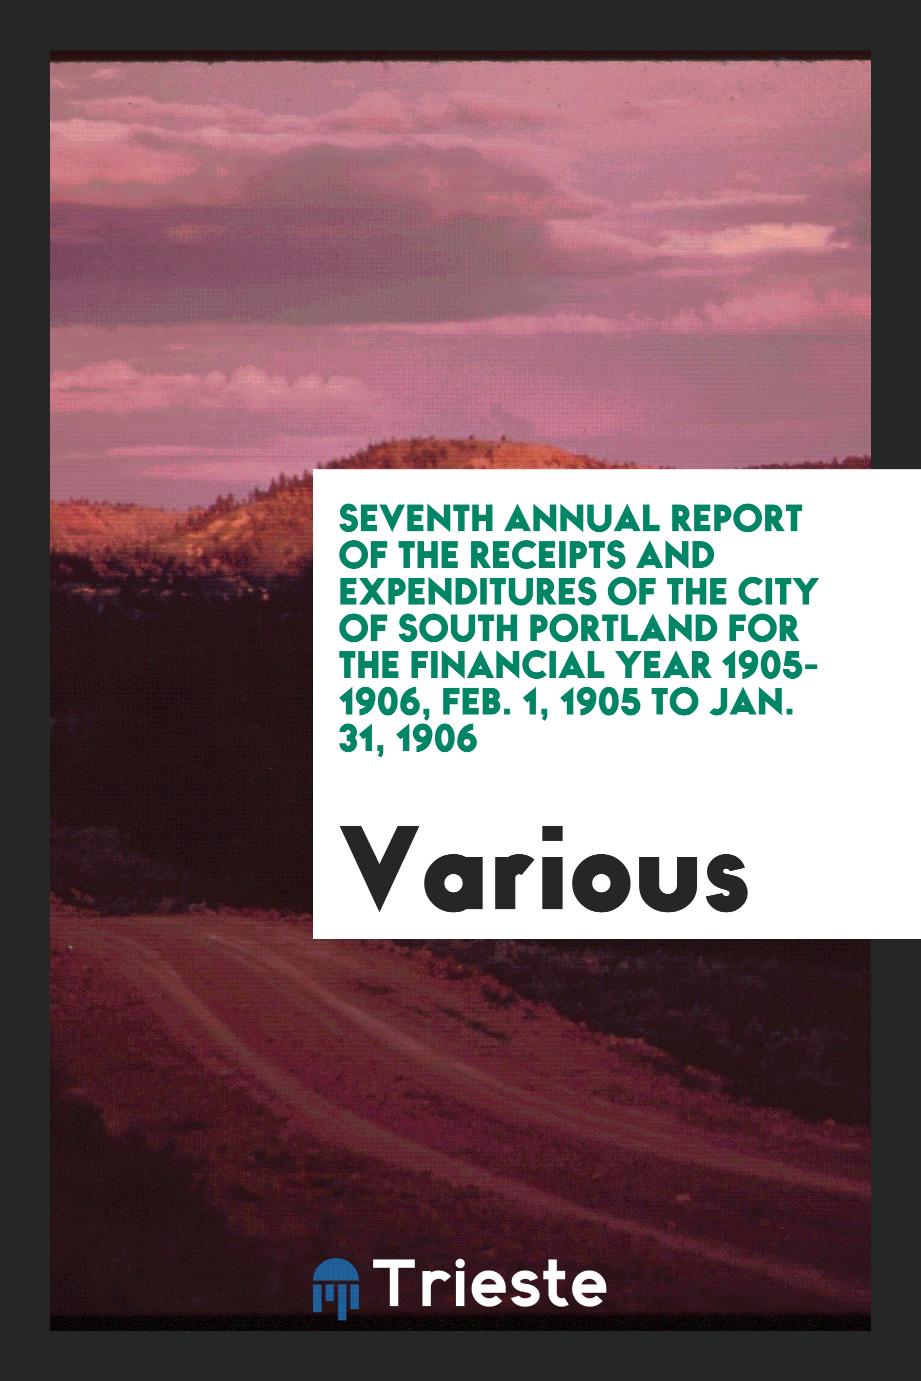 Seventh Annual Report of the Receipts and Expenditures of the City of South Portland for the Financial Year 1905-1906, Feb. 1, 1905 to Jan. 31, 1906